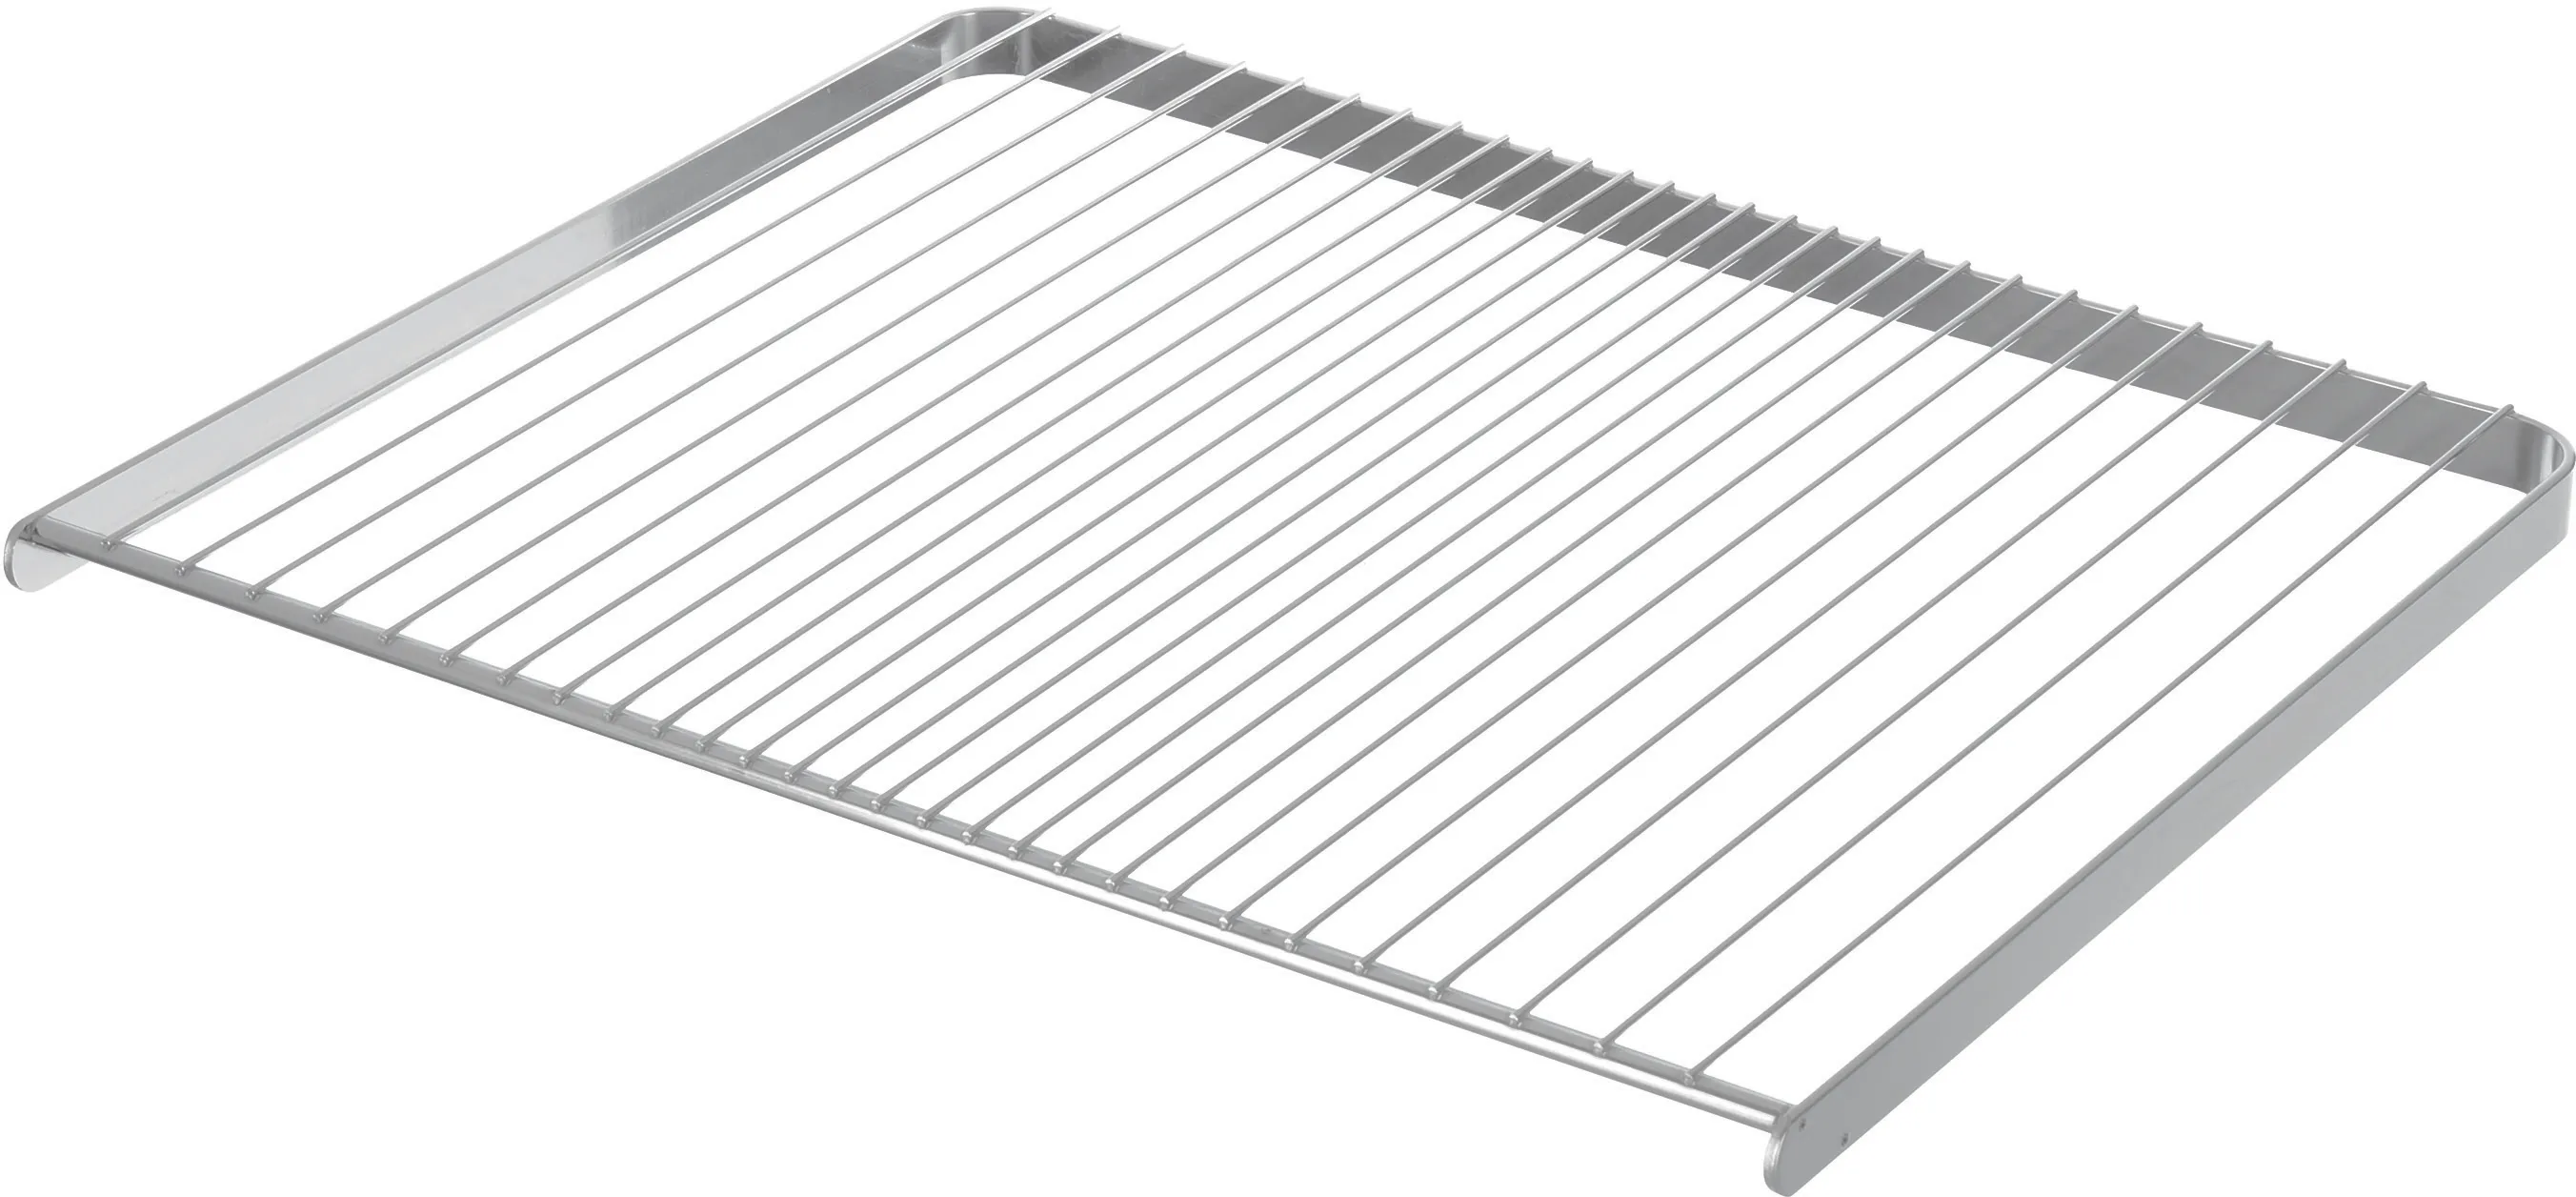 Multi-use wire shelf Wire multi use baking tray for ovens 